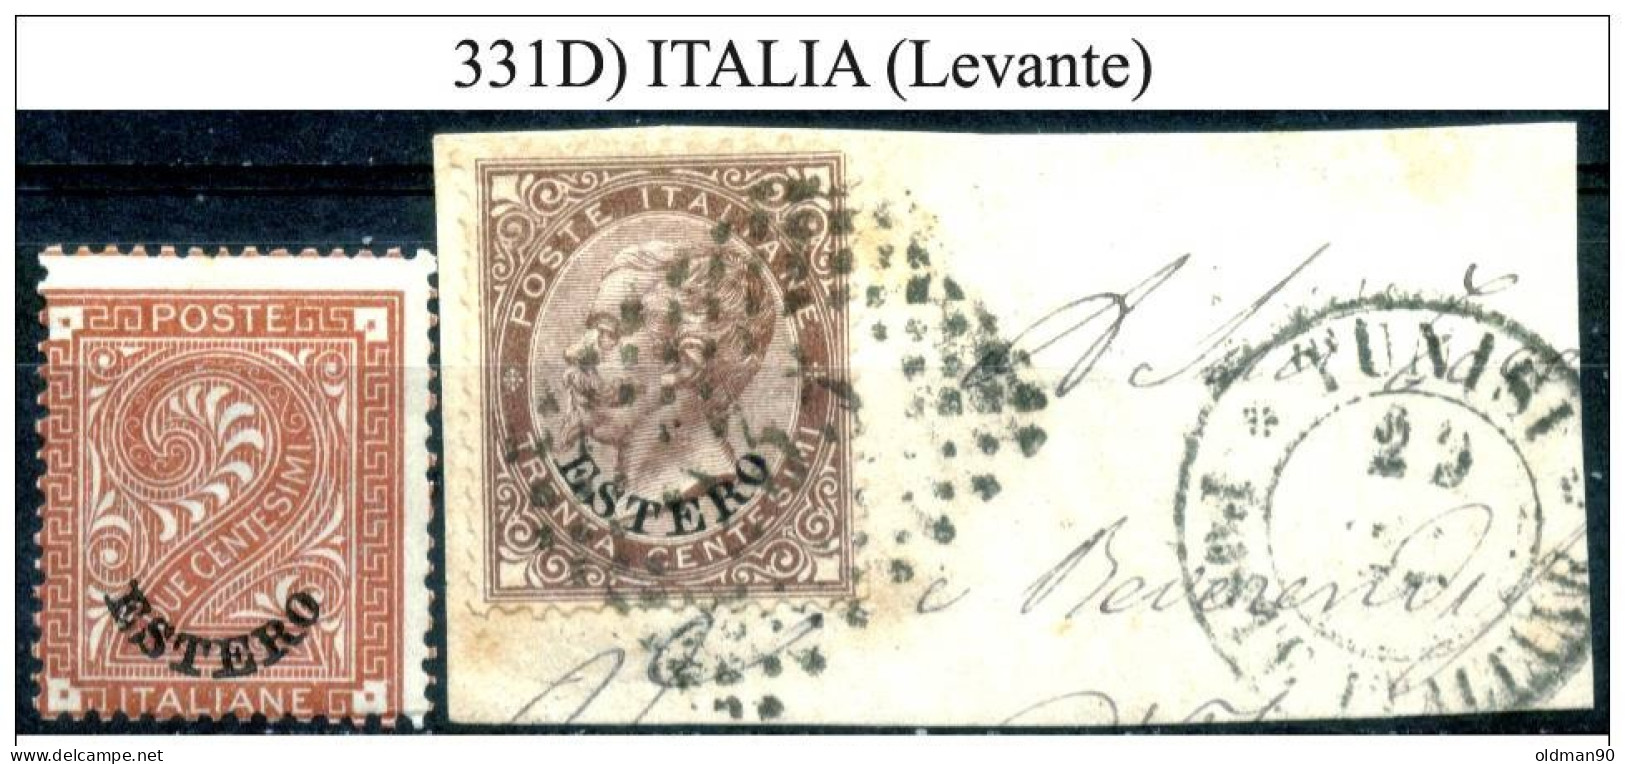 Italia-A.00331D - General Issues